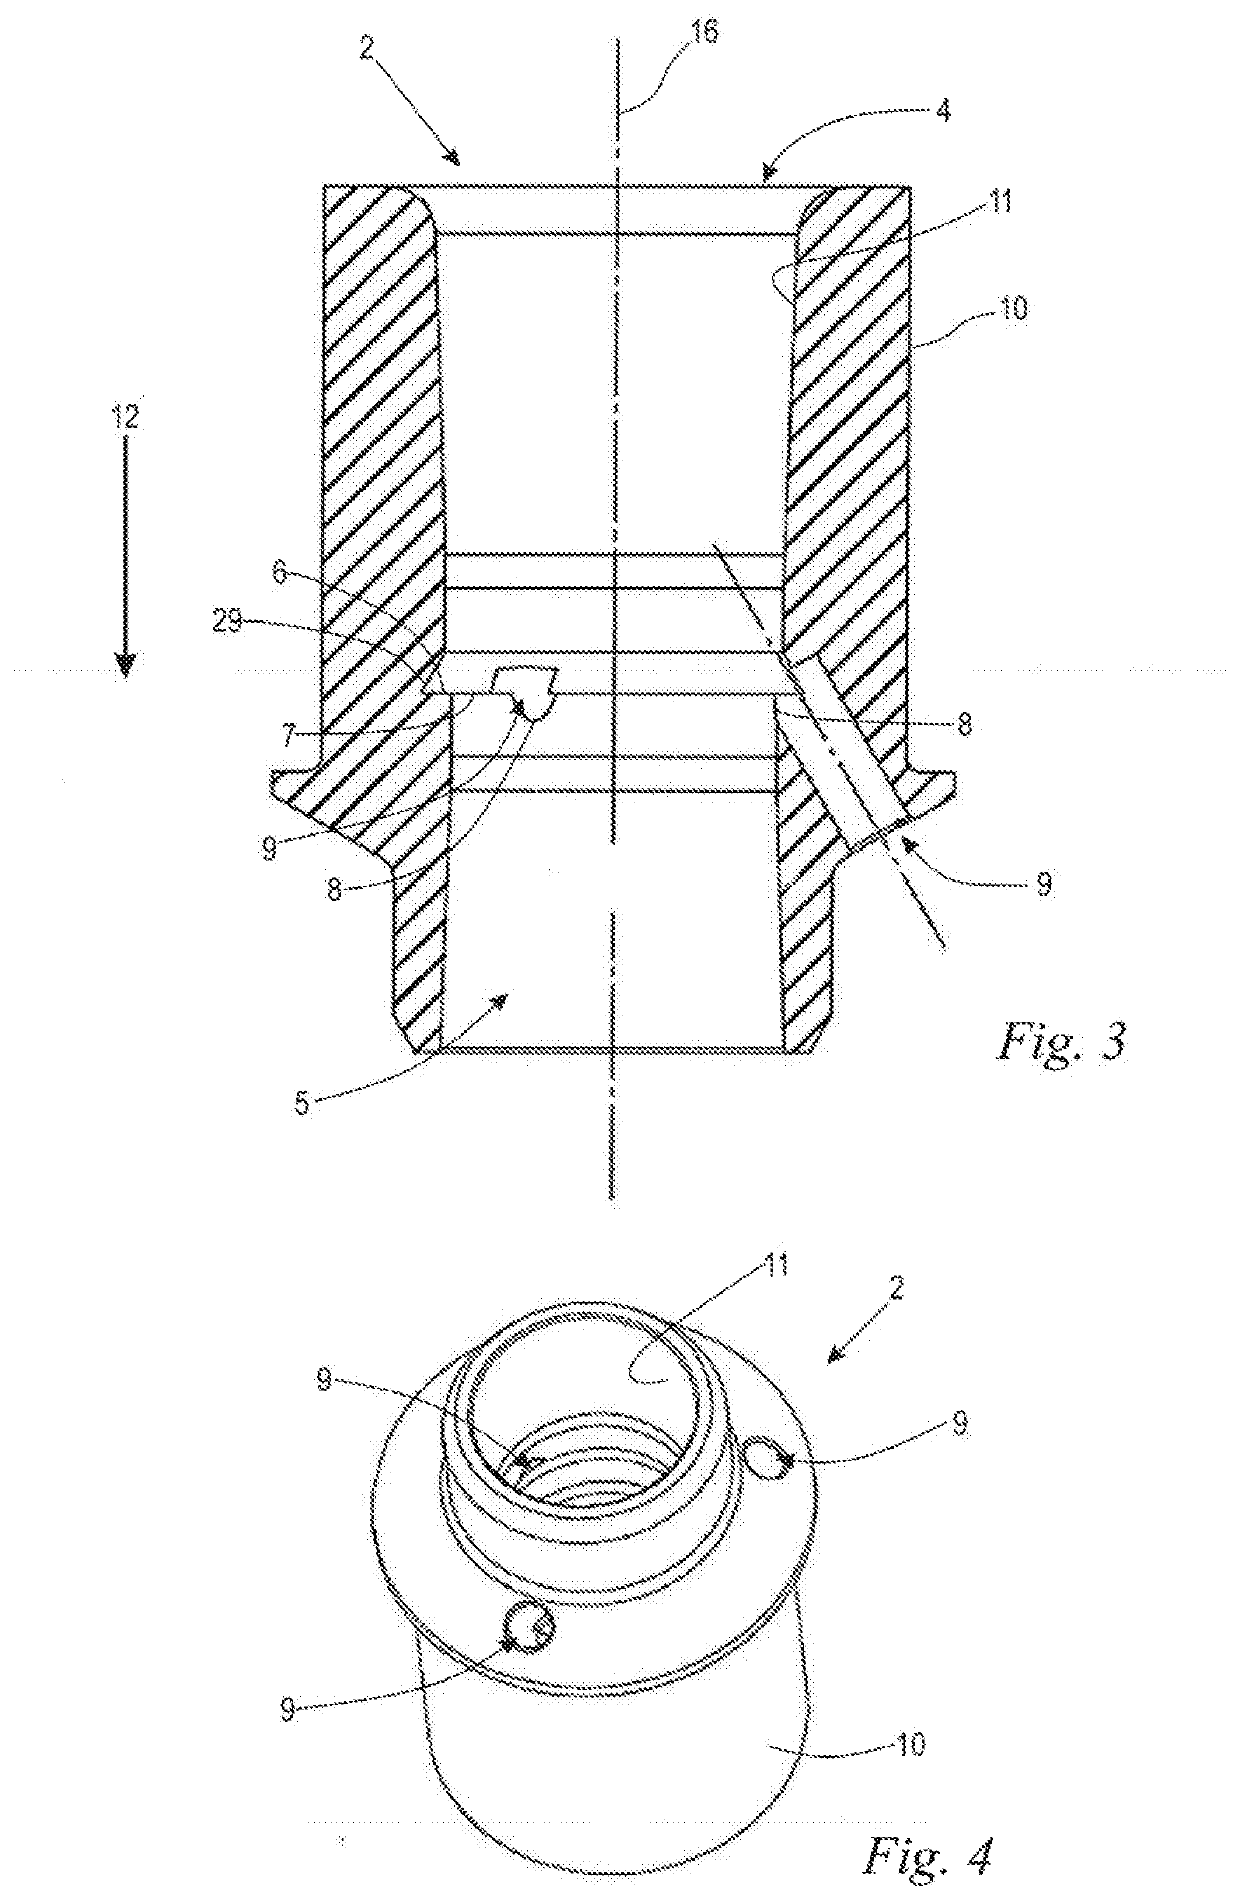 Capsule Closure Device for Closing Two-Piece Capsules